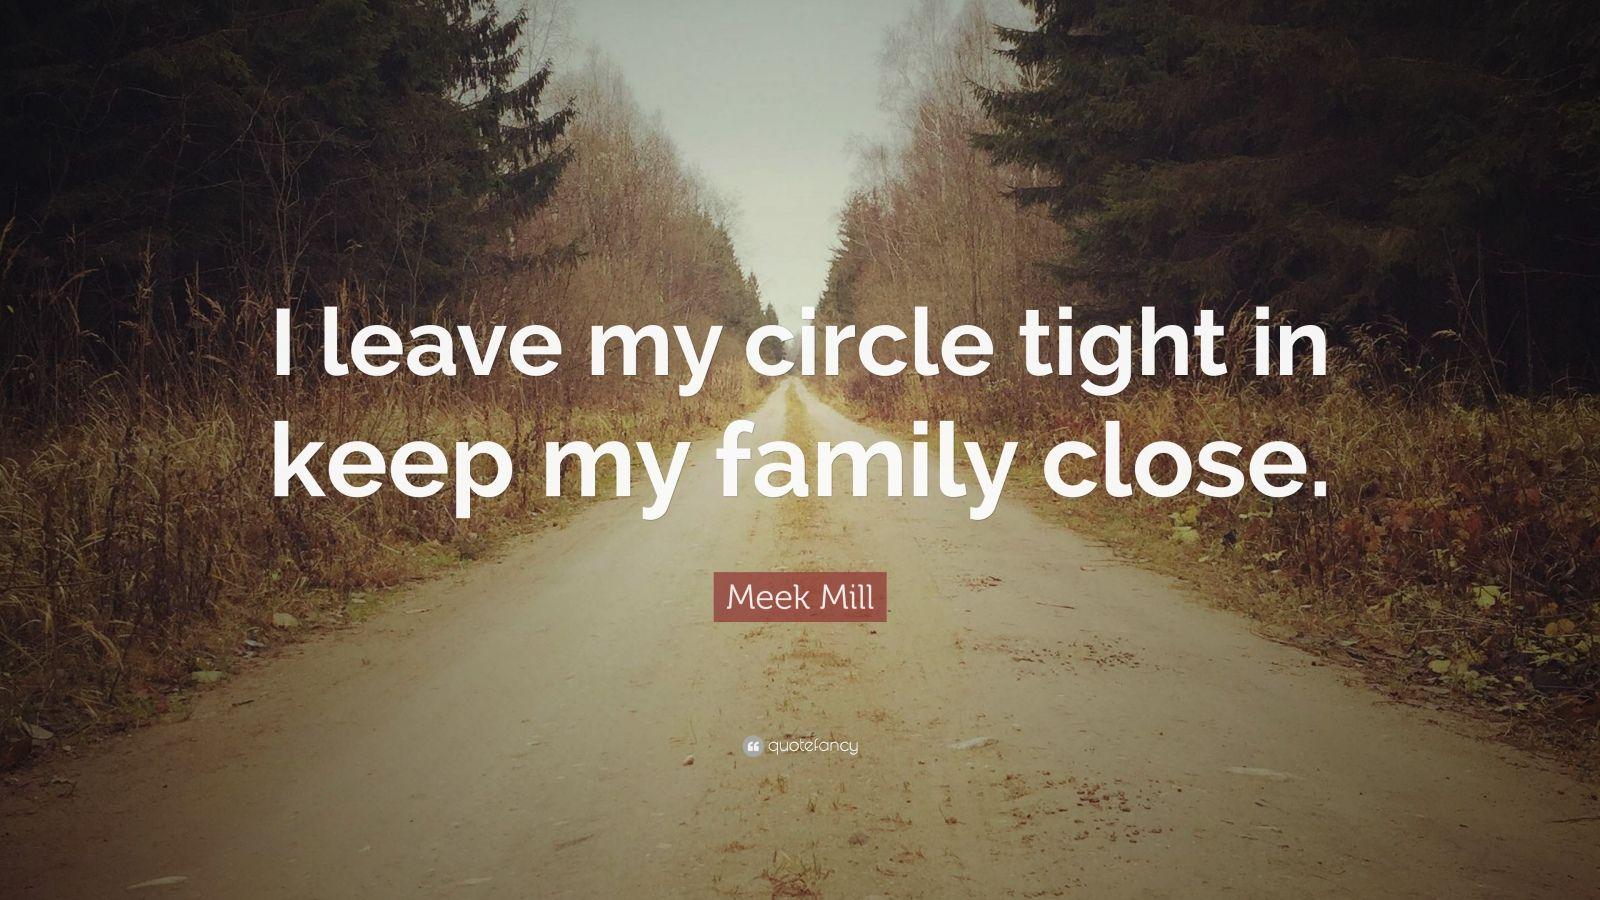 Meek Mill Quote: “I leave my circle tight in keep my family